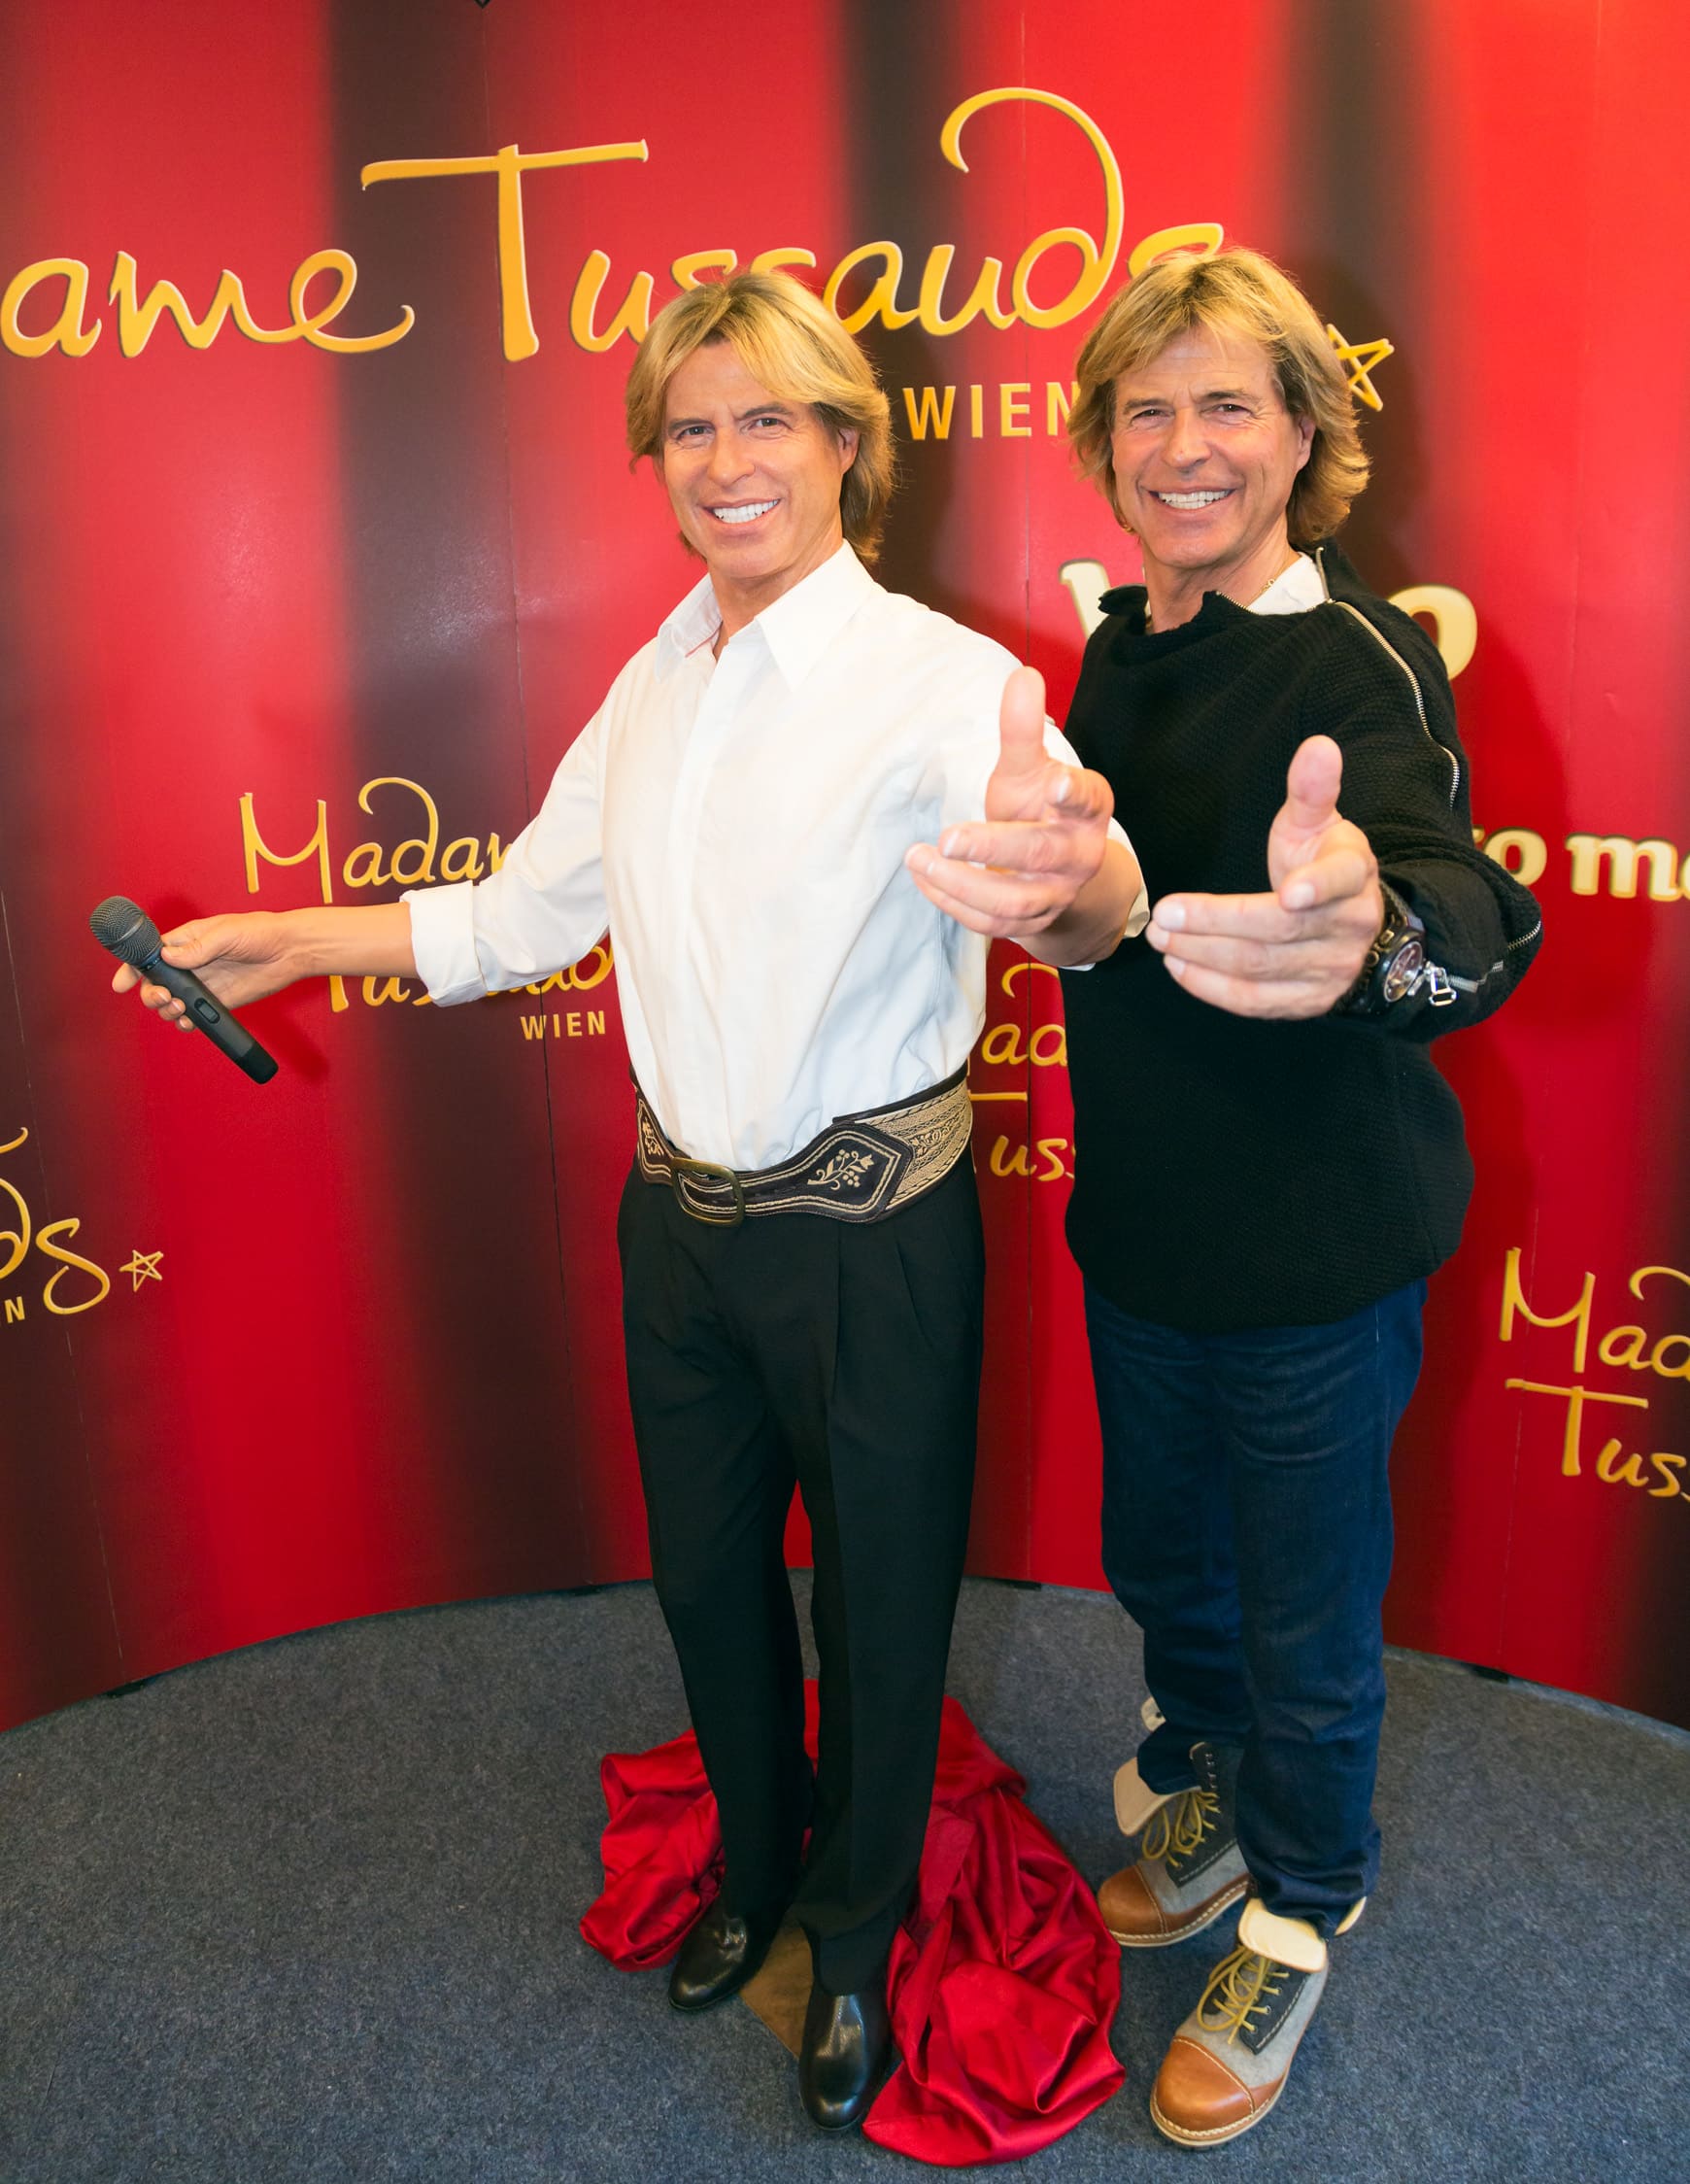 Hansi Hinterseer poses with his wax figure at Madame Tussauds™ Vienna